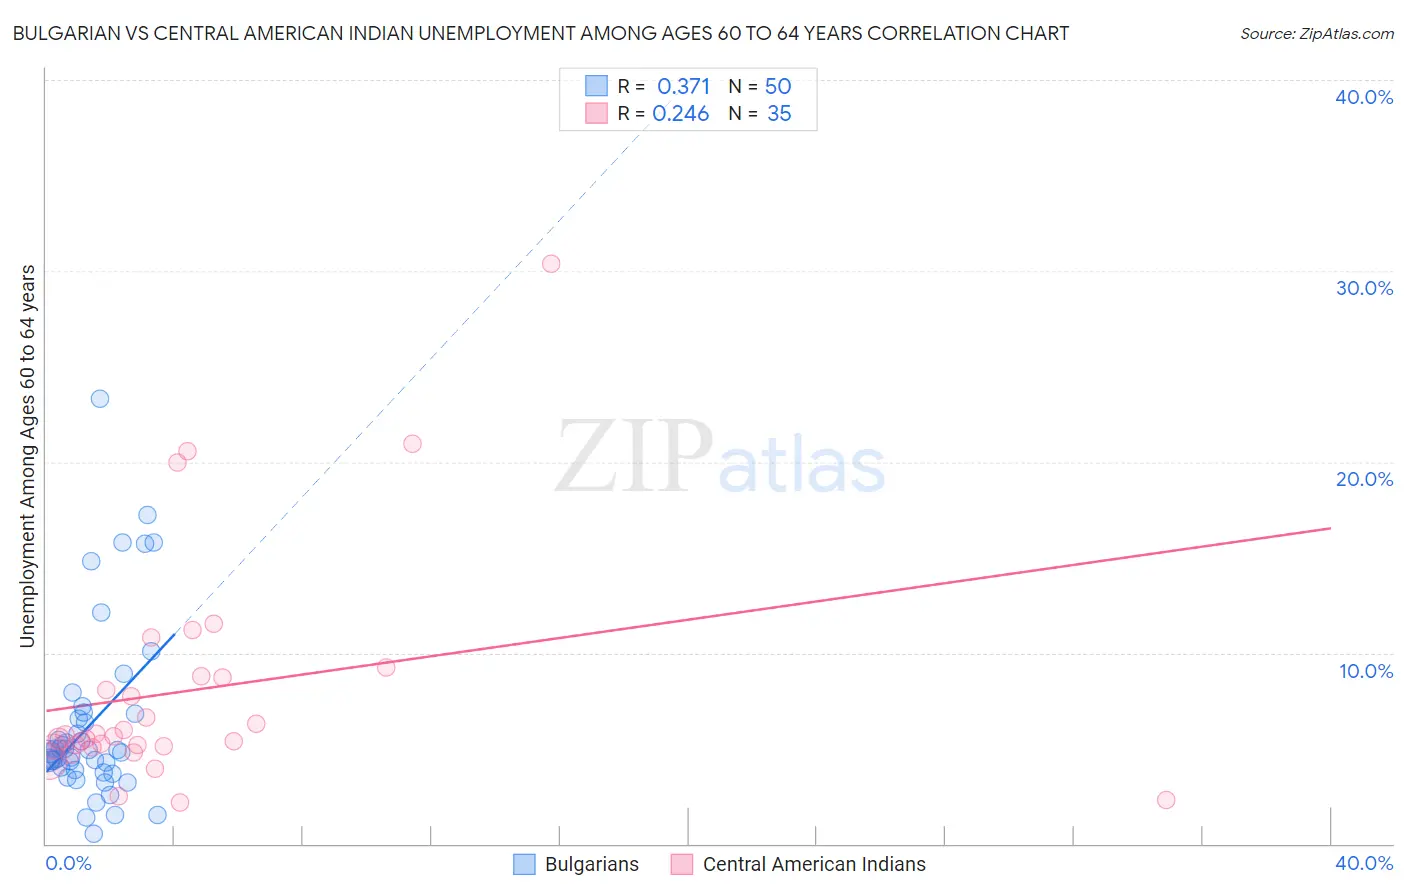 Bulgarian vs Central American Indian Unemployment Among Ages 60 to 64 years